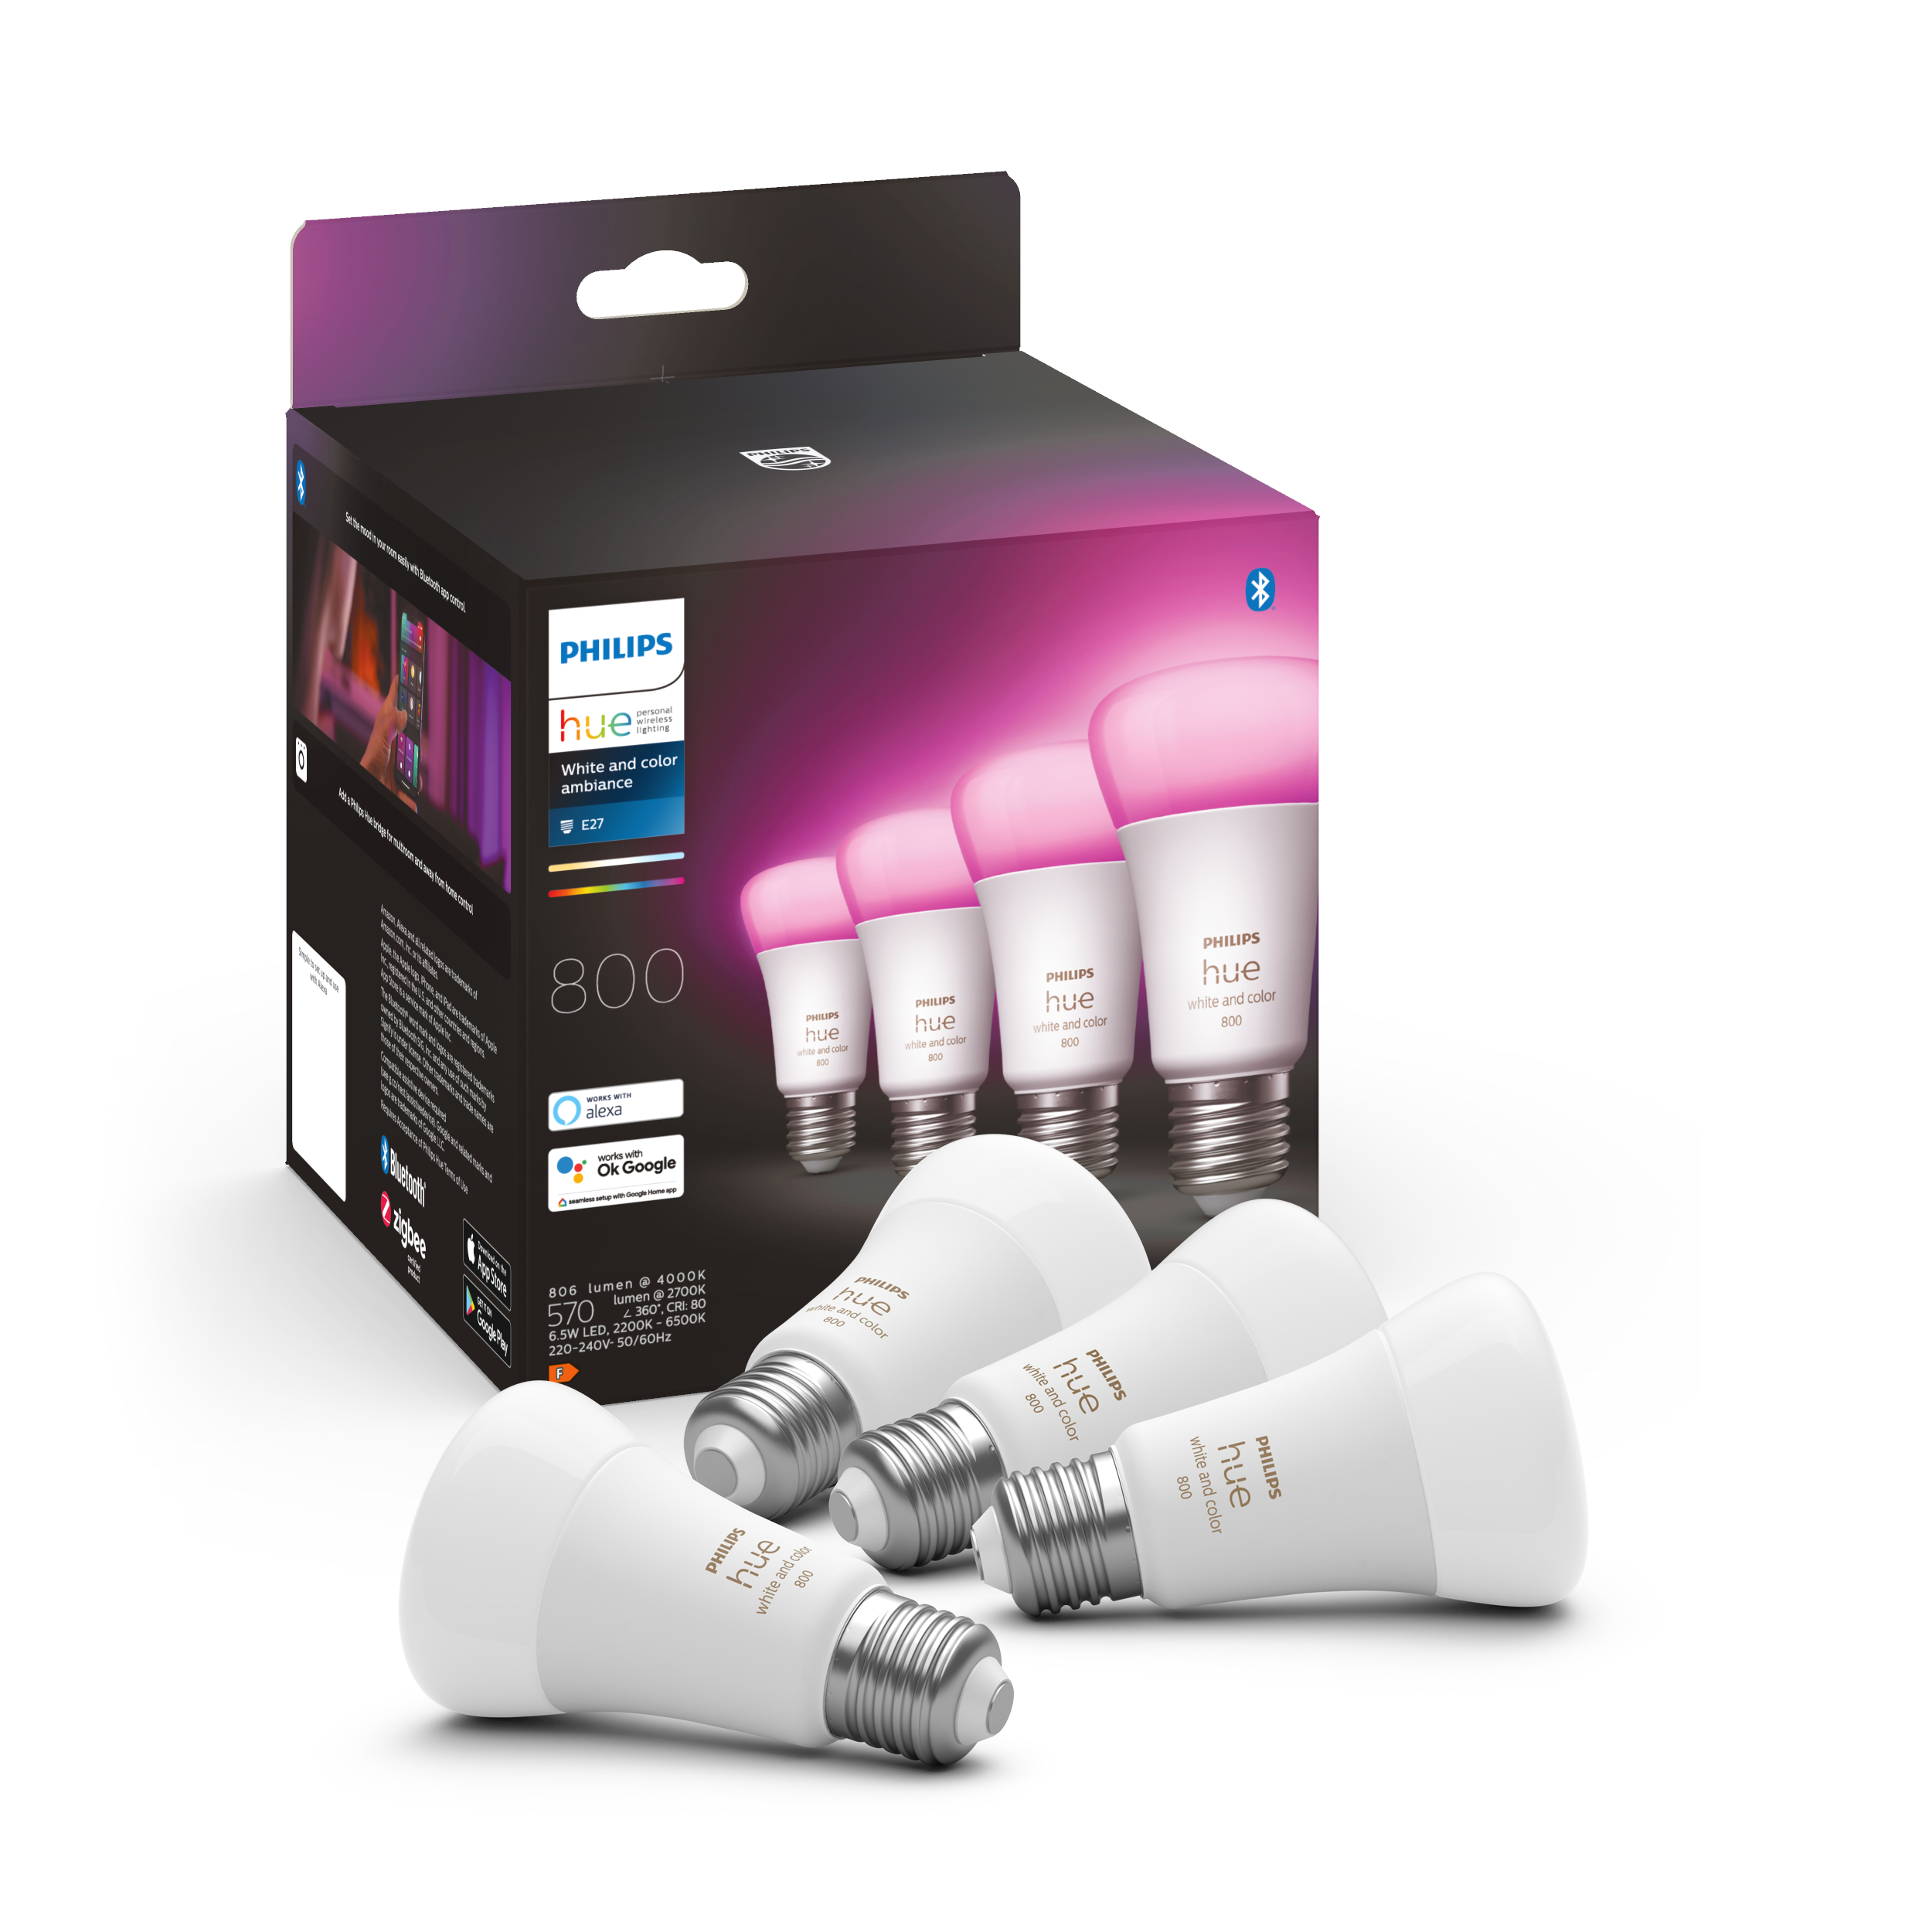 Bec LED Philips Hue alb and Color Ambiance LED E27 Pack of 4 4x570lm